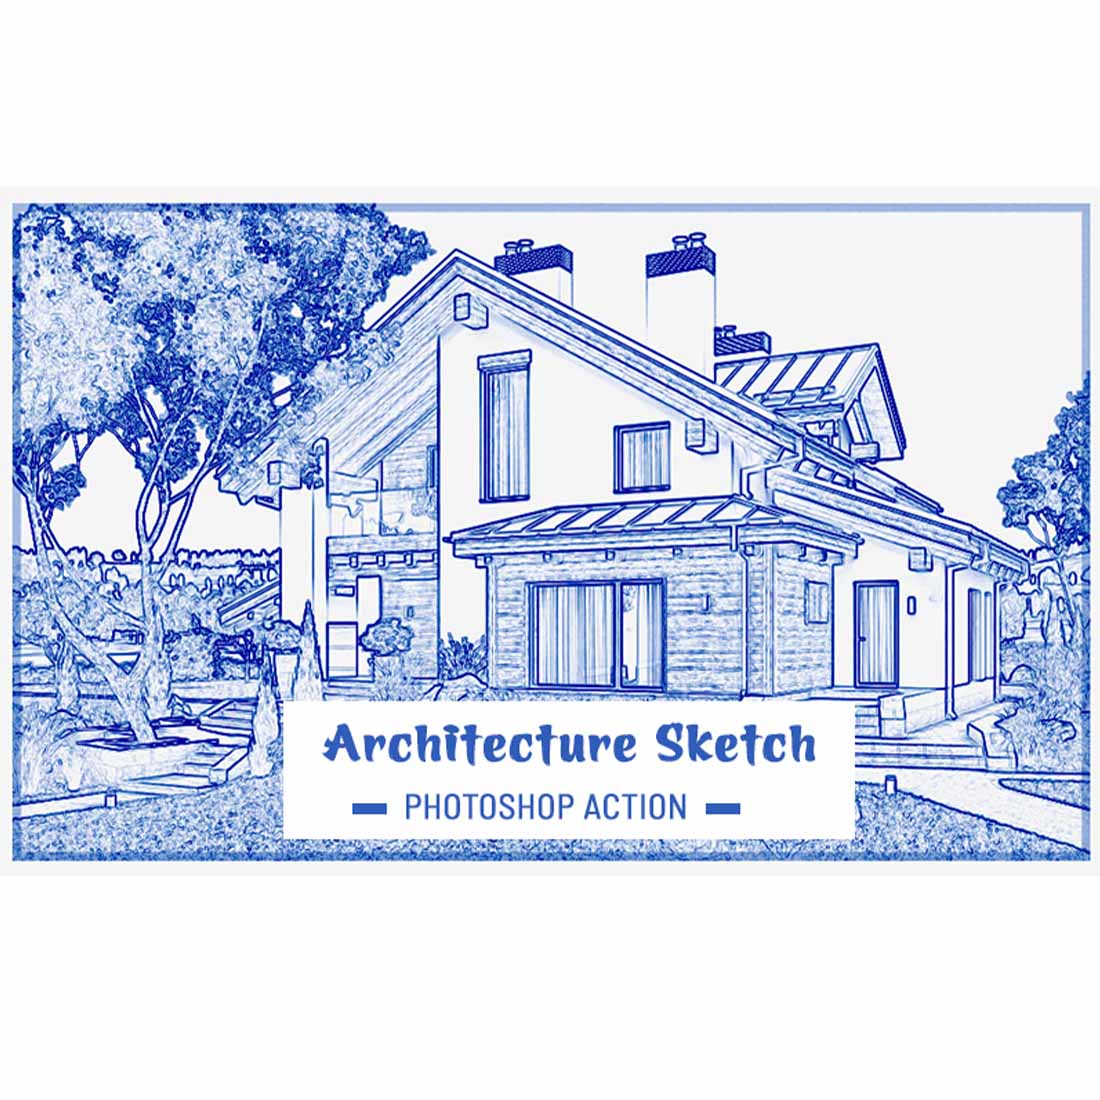 Architecture Sketch photoshop Action cover image.